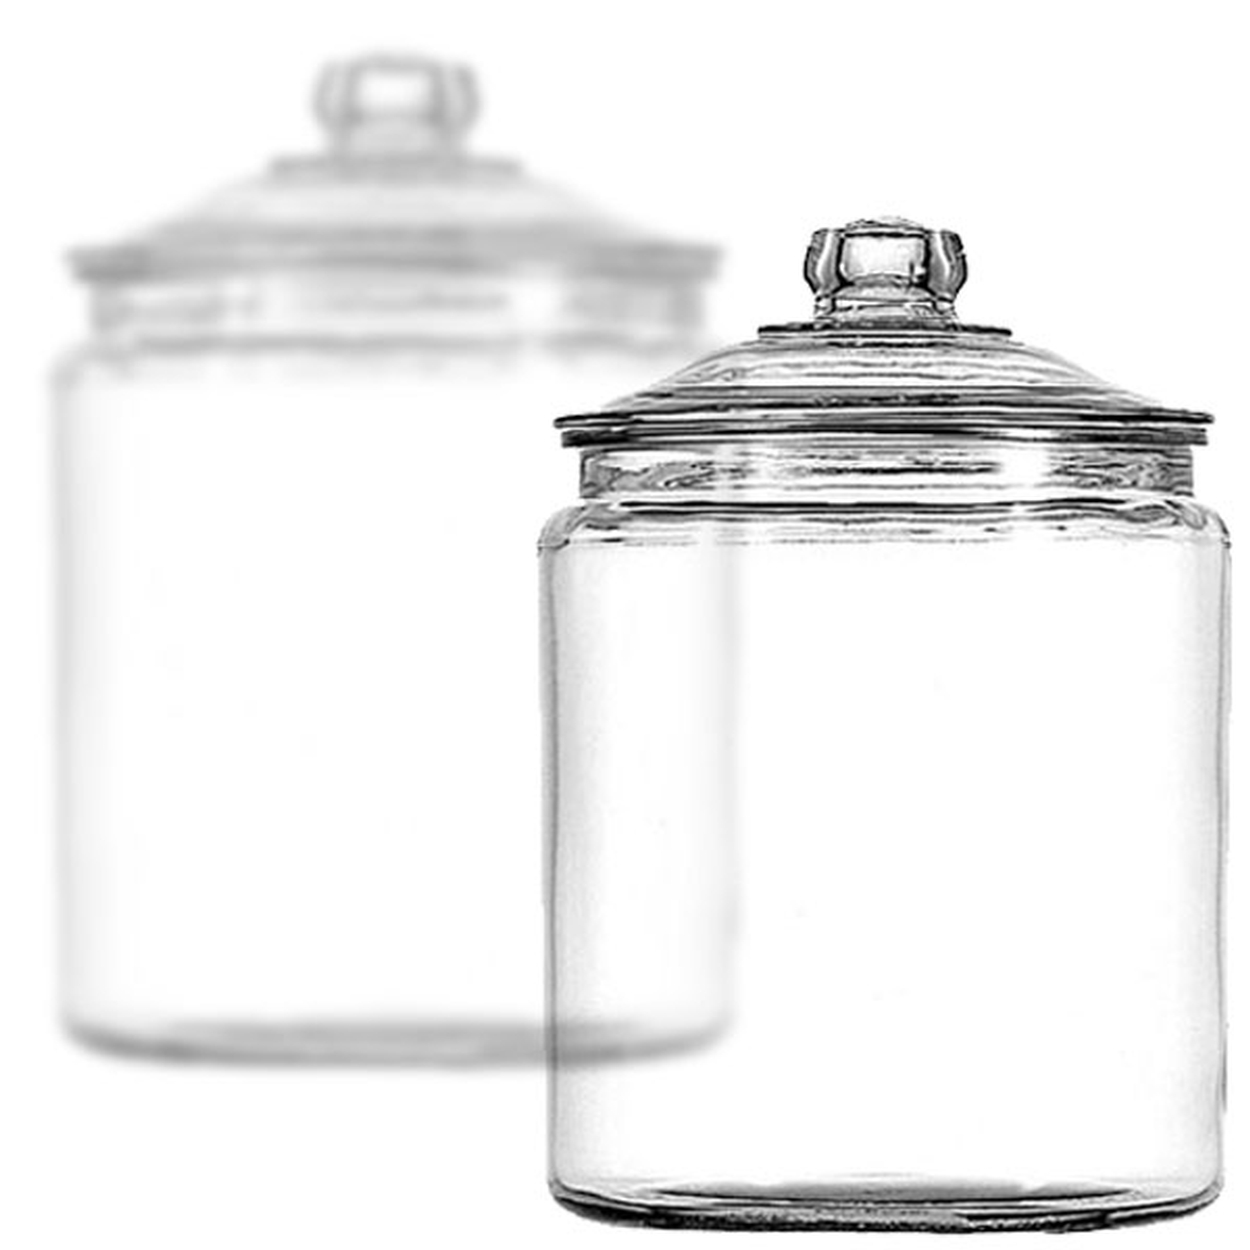 Wholesale Clear Glass Jar Candy Containers with Lids Glass